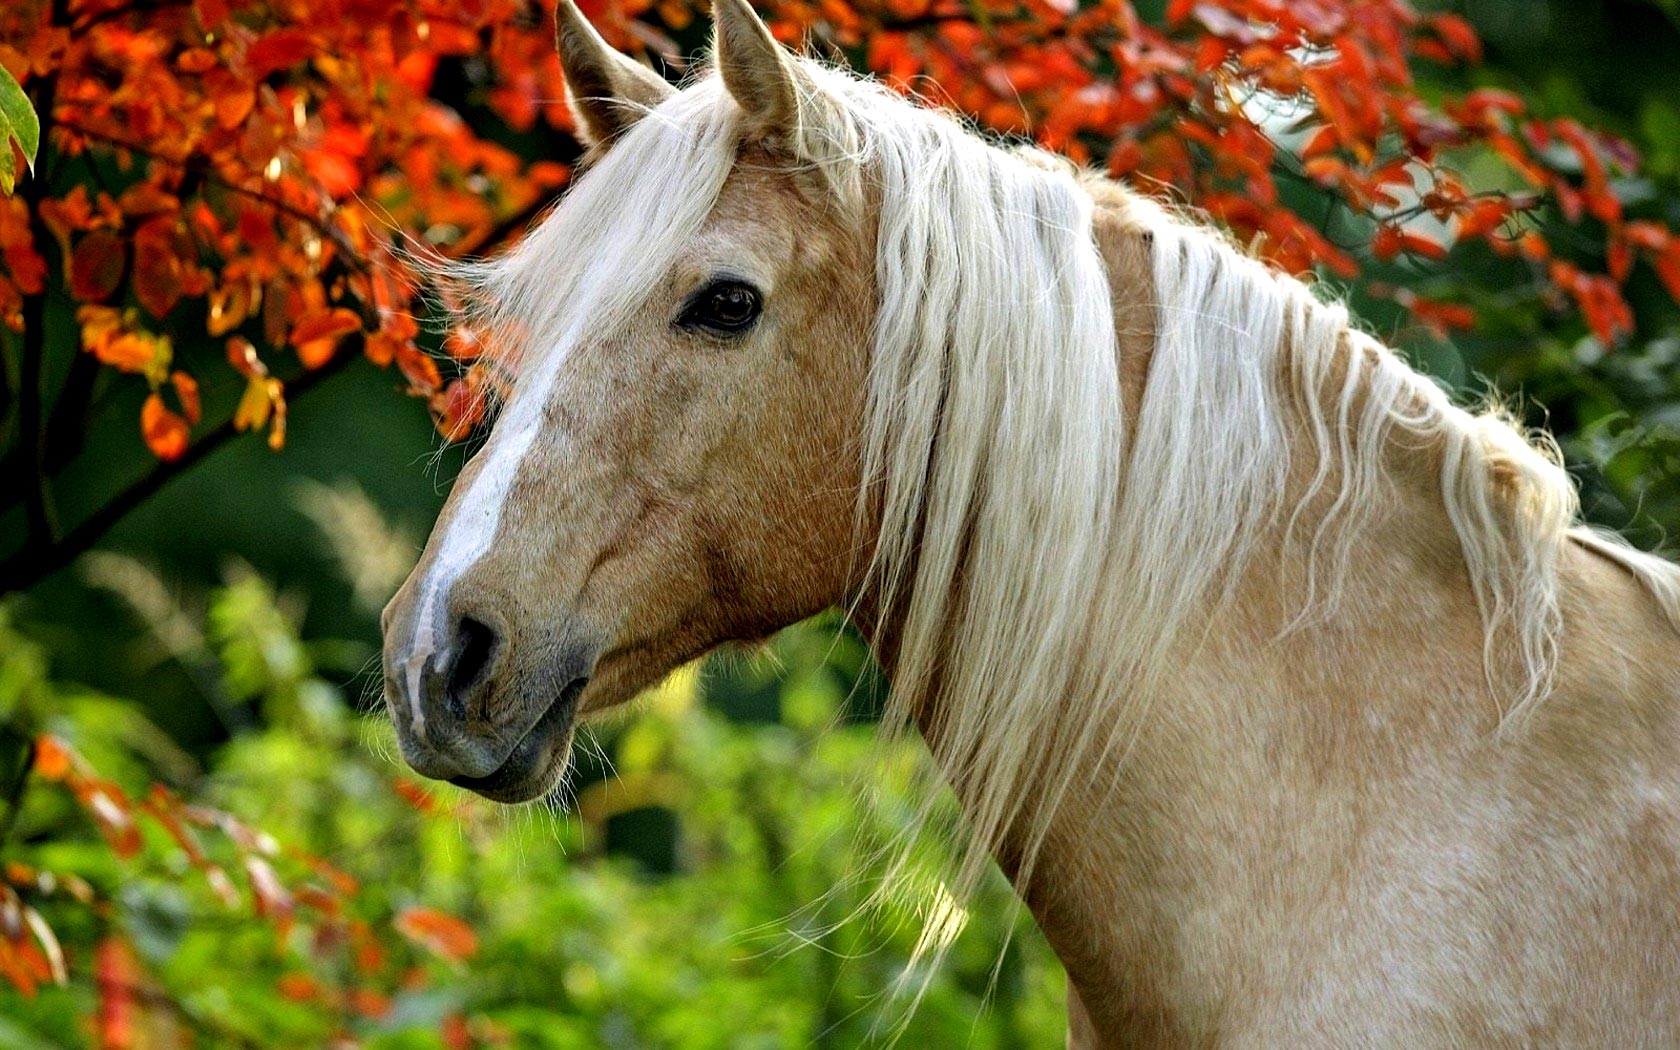 Horse Background HD Wallpaper And Make This For Your